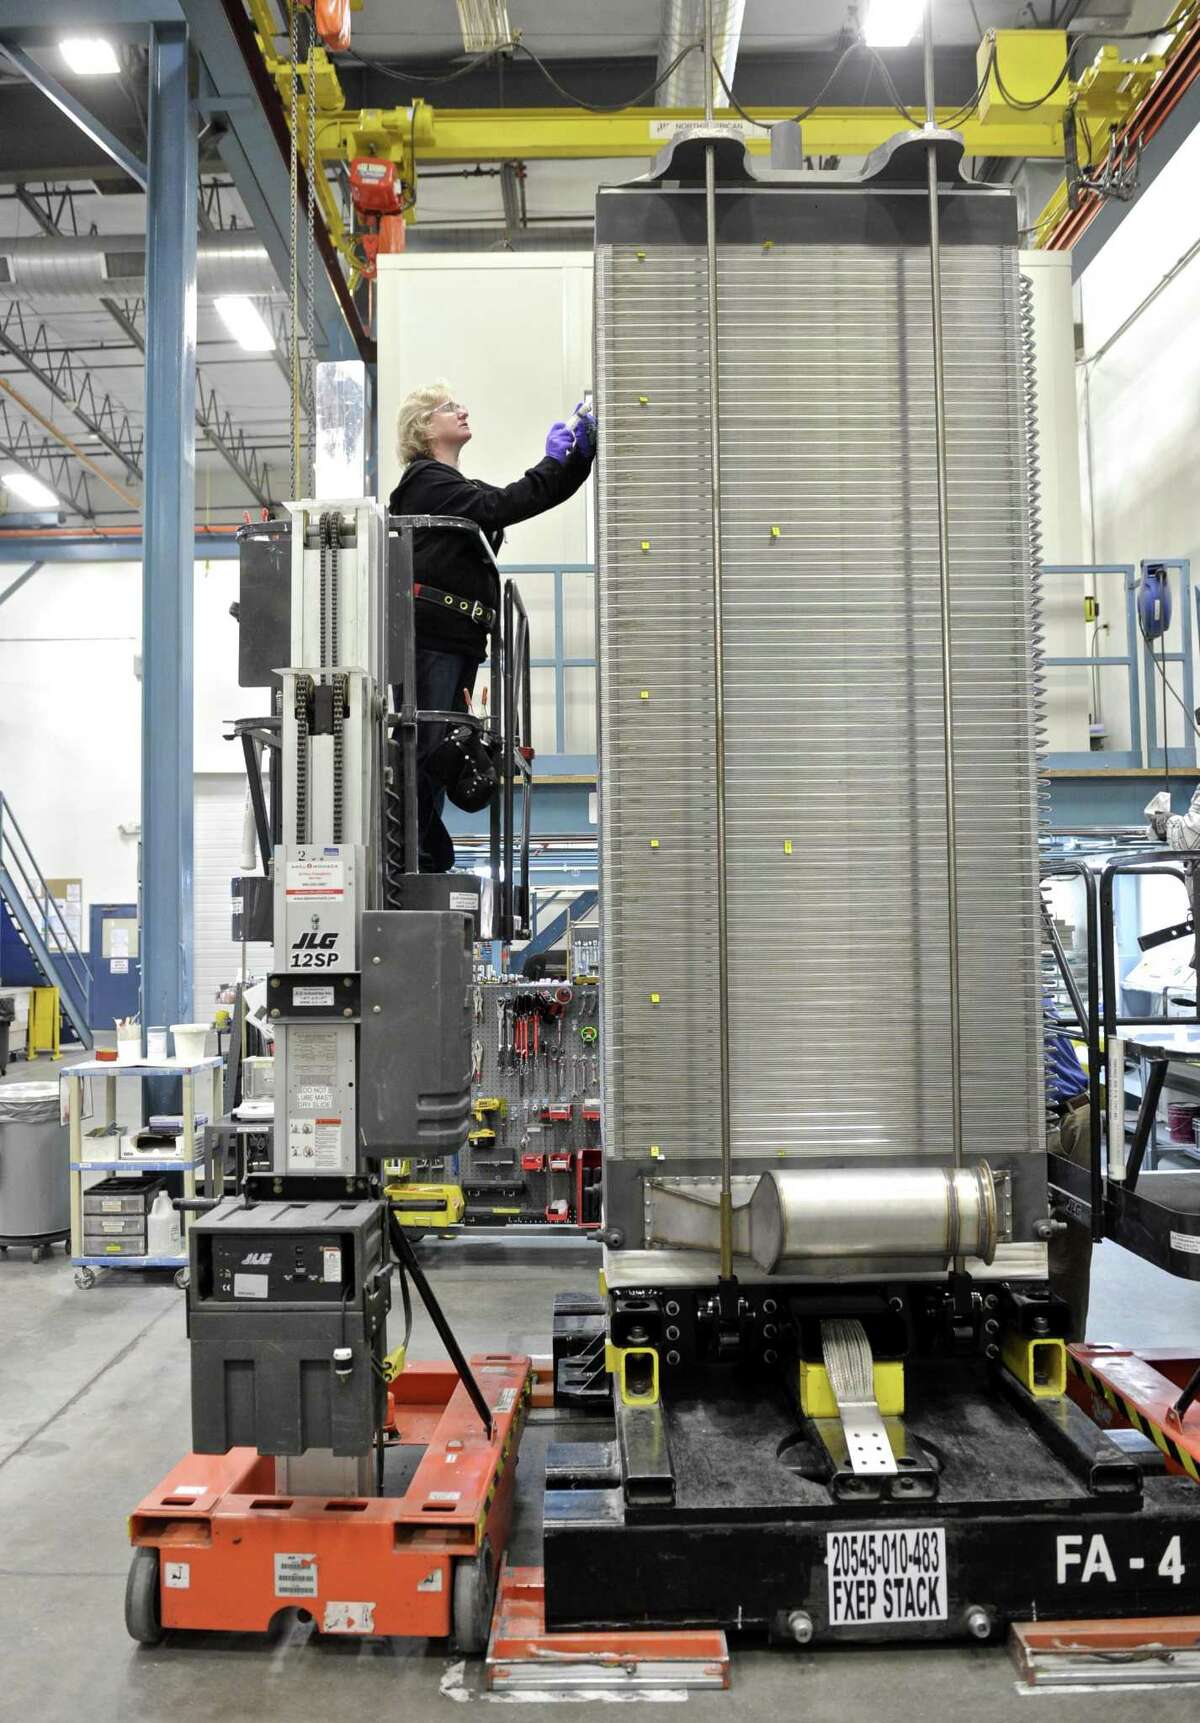 Janet Hixson completes the work on a 400 cell fuel cell stack at the FuelCell Energy manufacturing plant in Torrington, Conn. Wednesday, February 1, 2017.